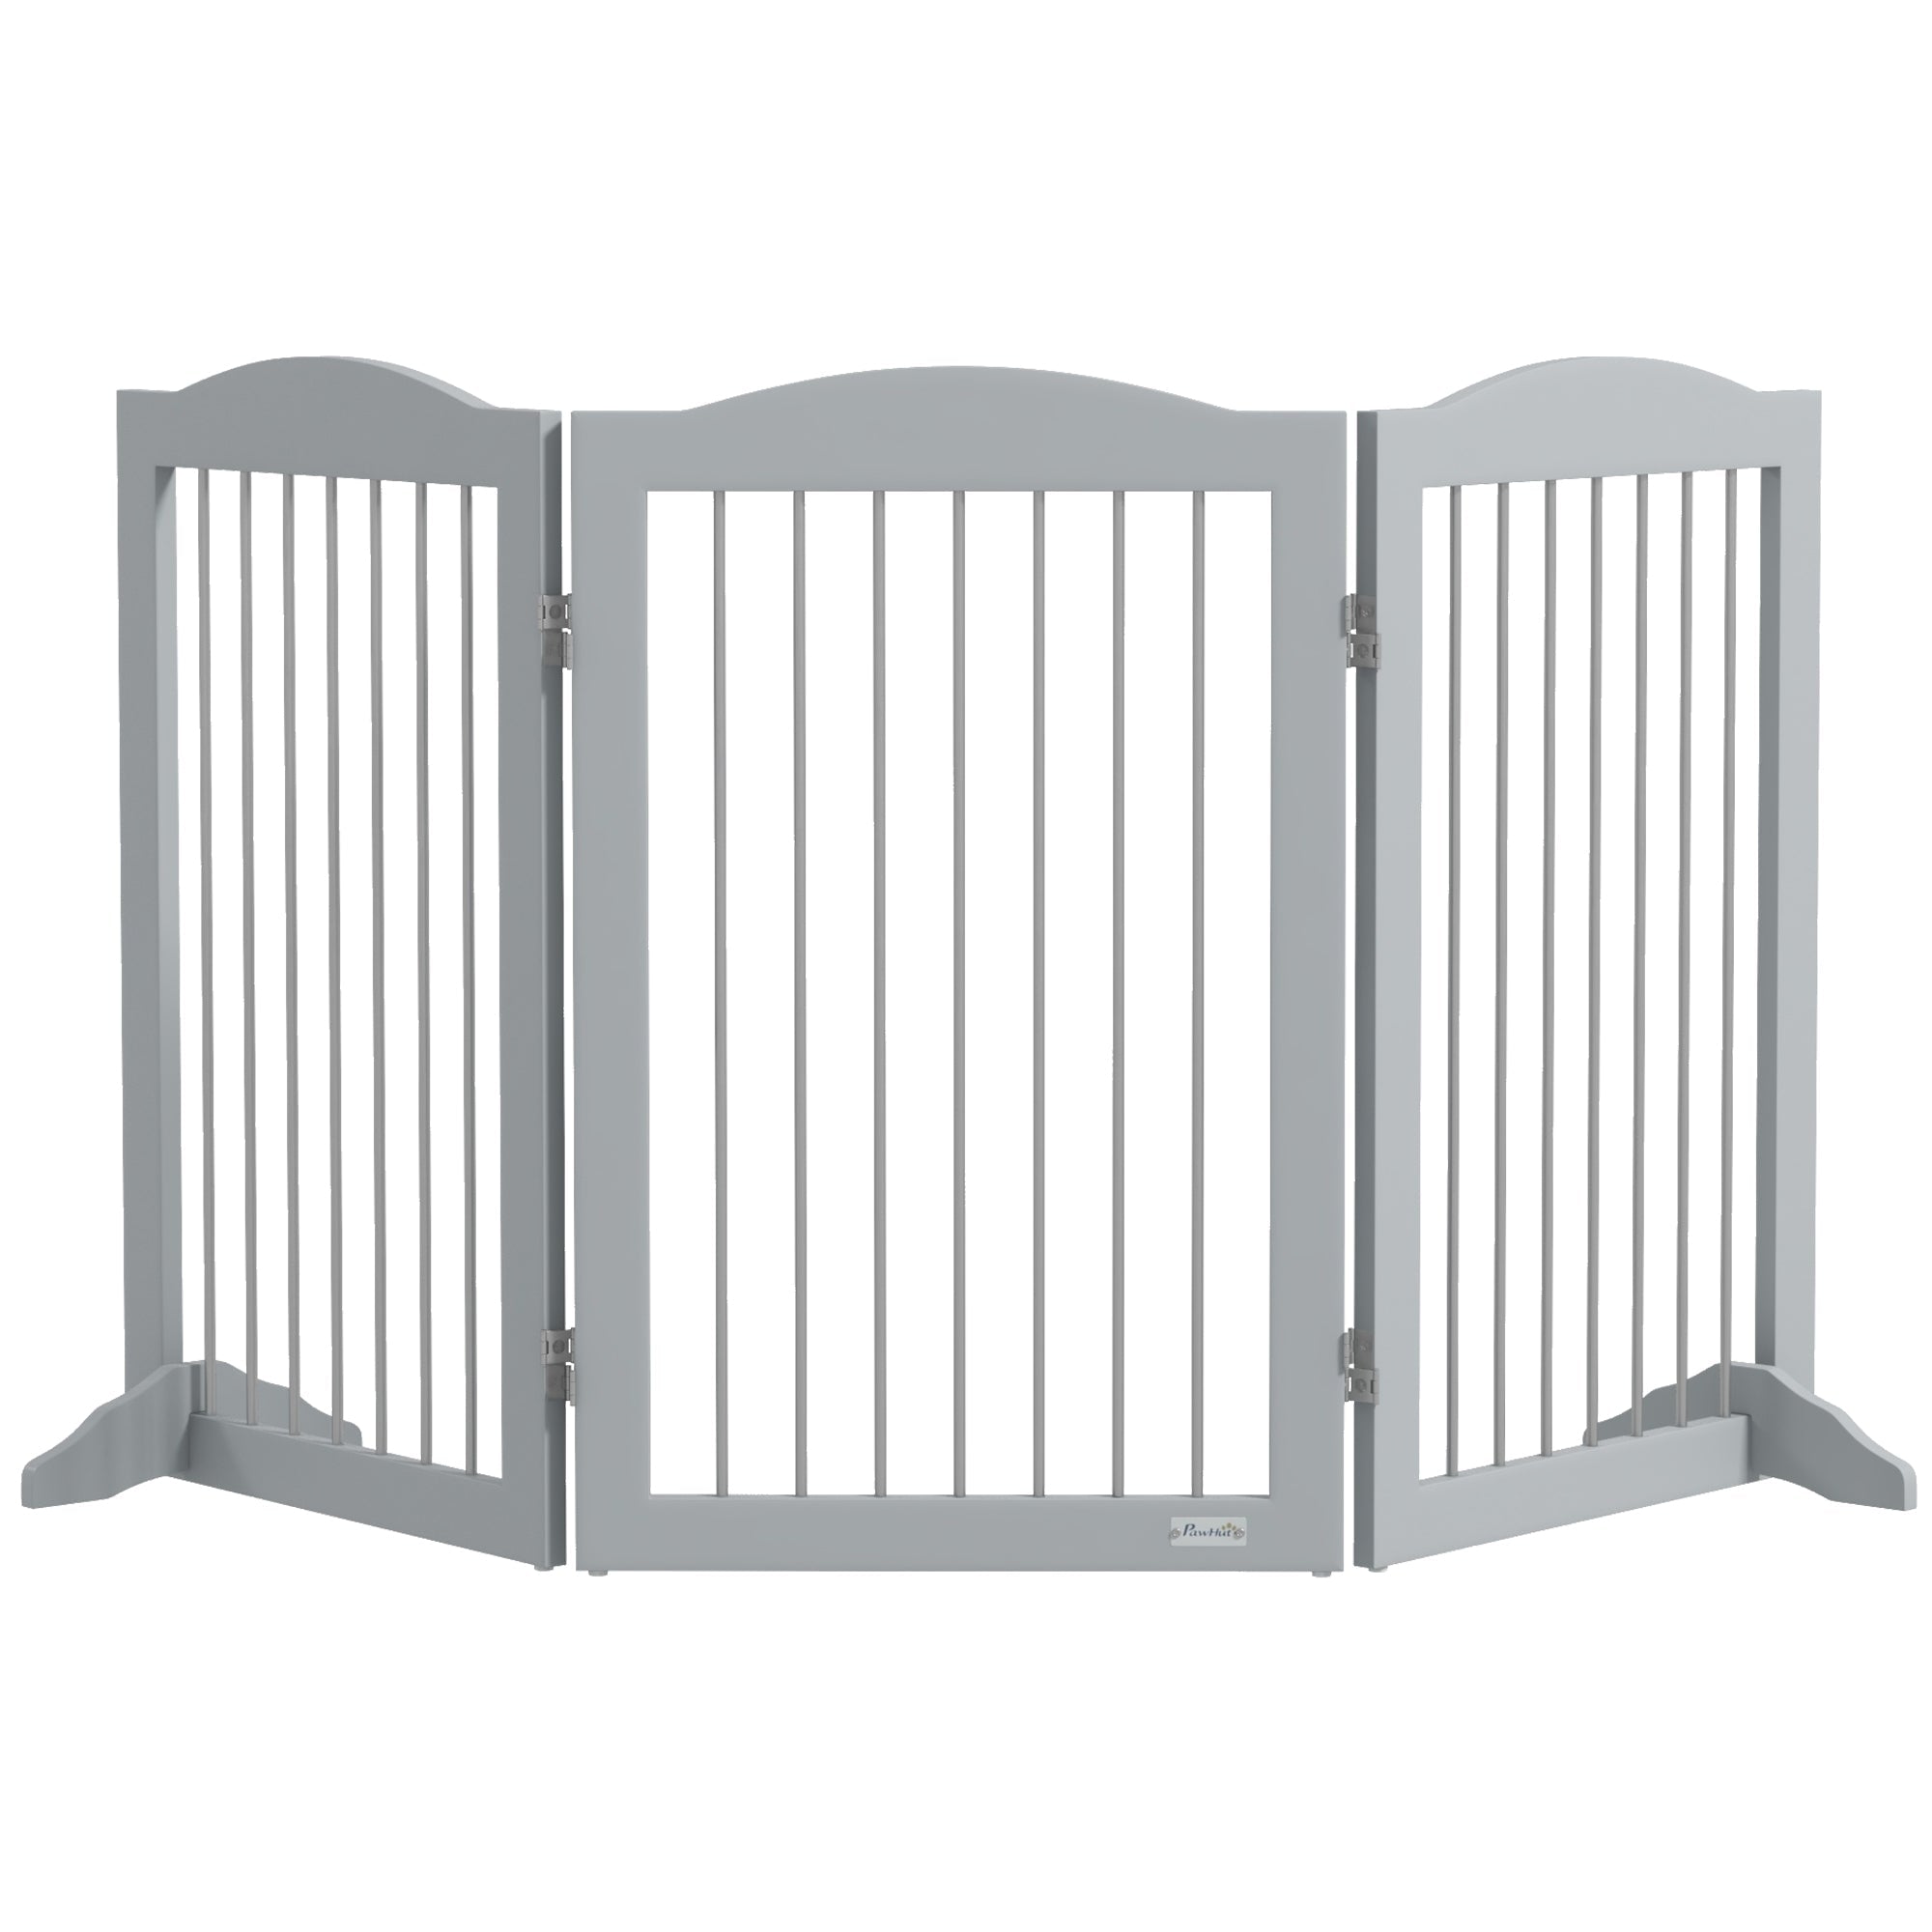 Foldable Dog Gate, Freestanding Pet Gate, with Two Support Feet, for Staircases, Hallways, Doorways - Grey-0